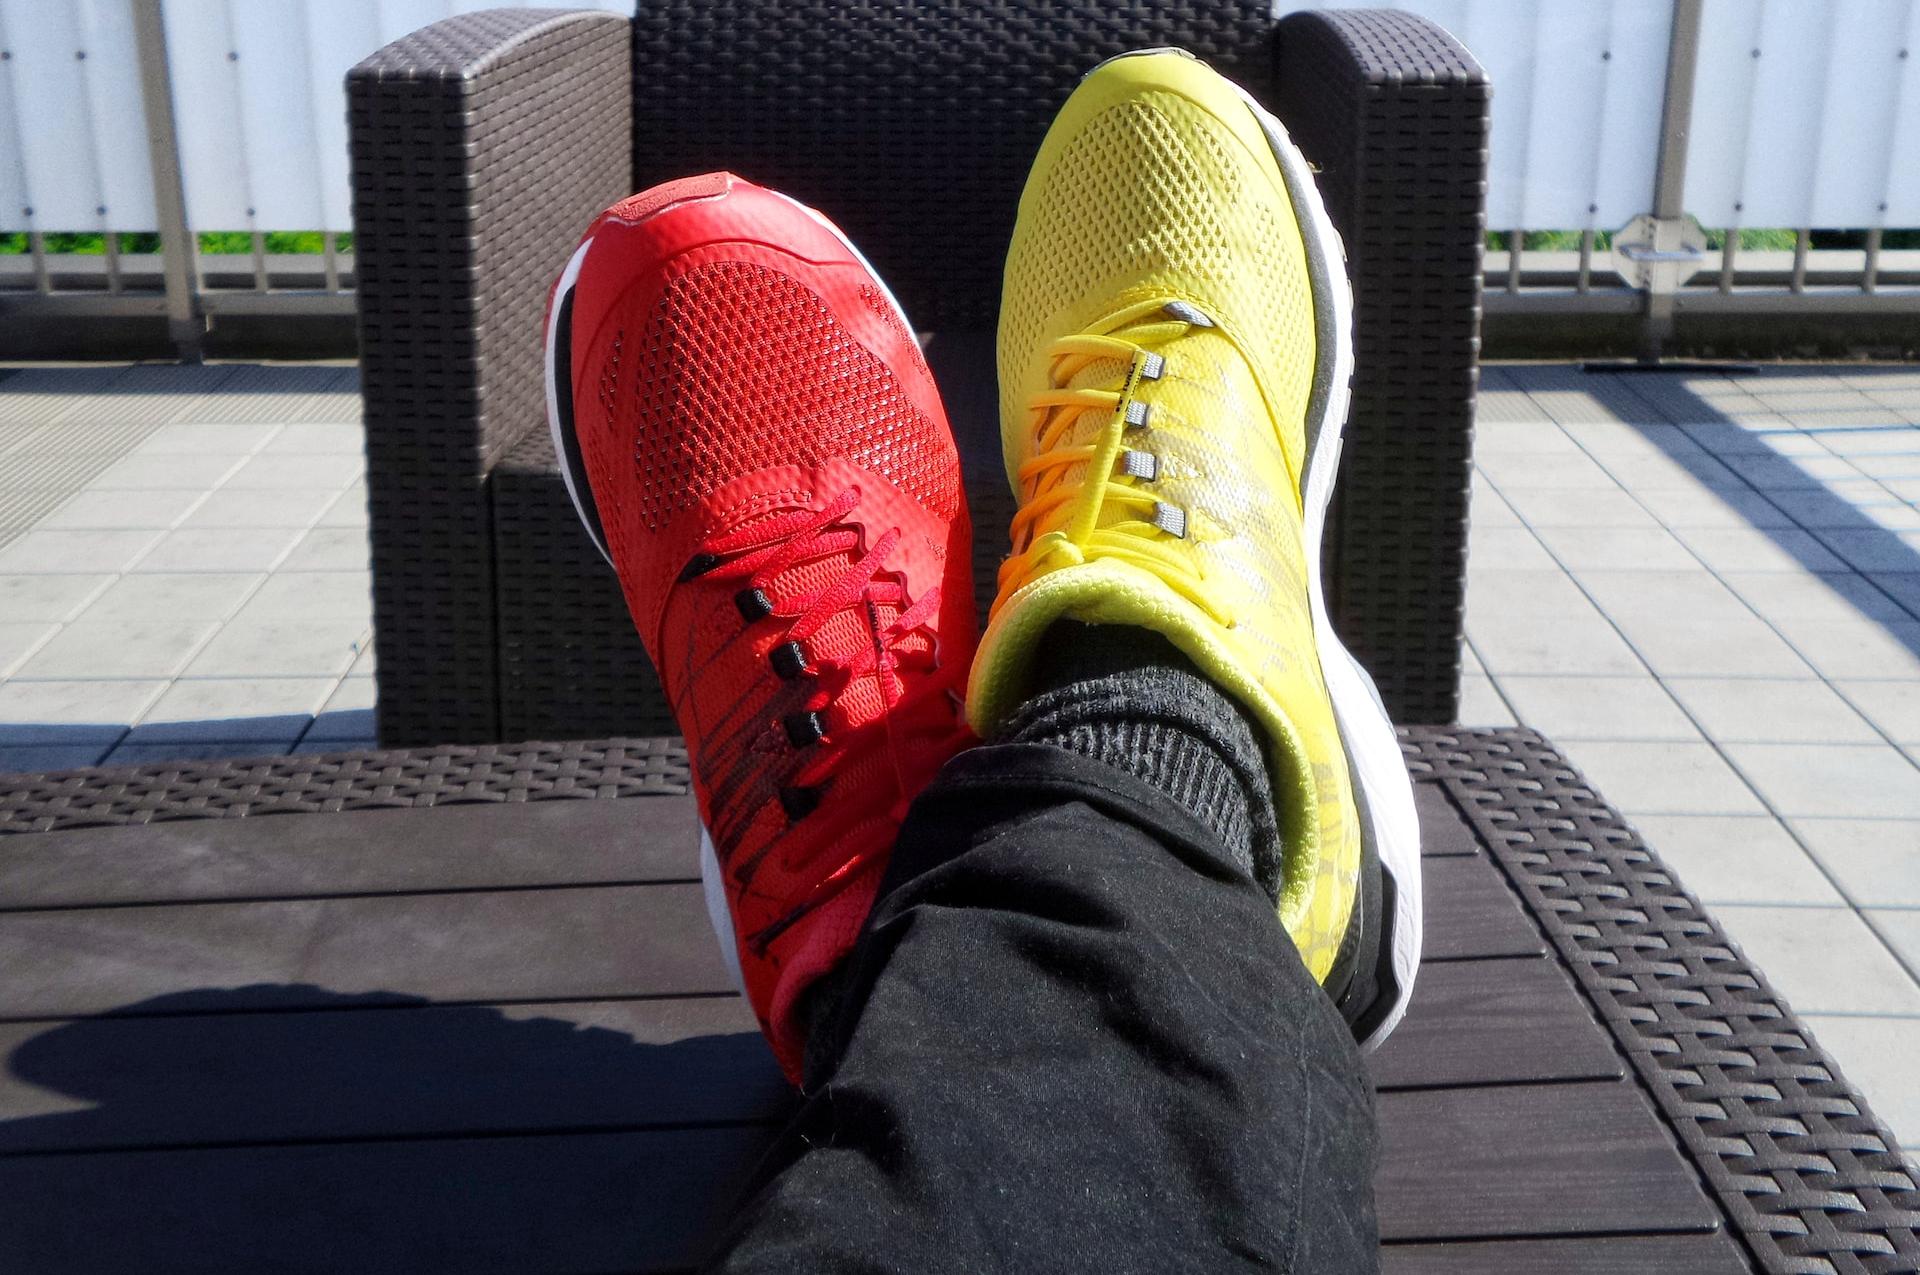 pair of red-and-yellow sneakers